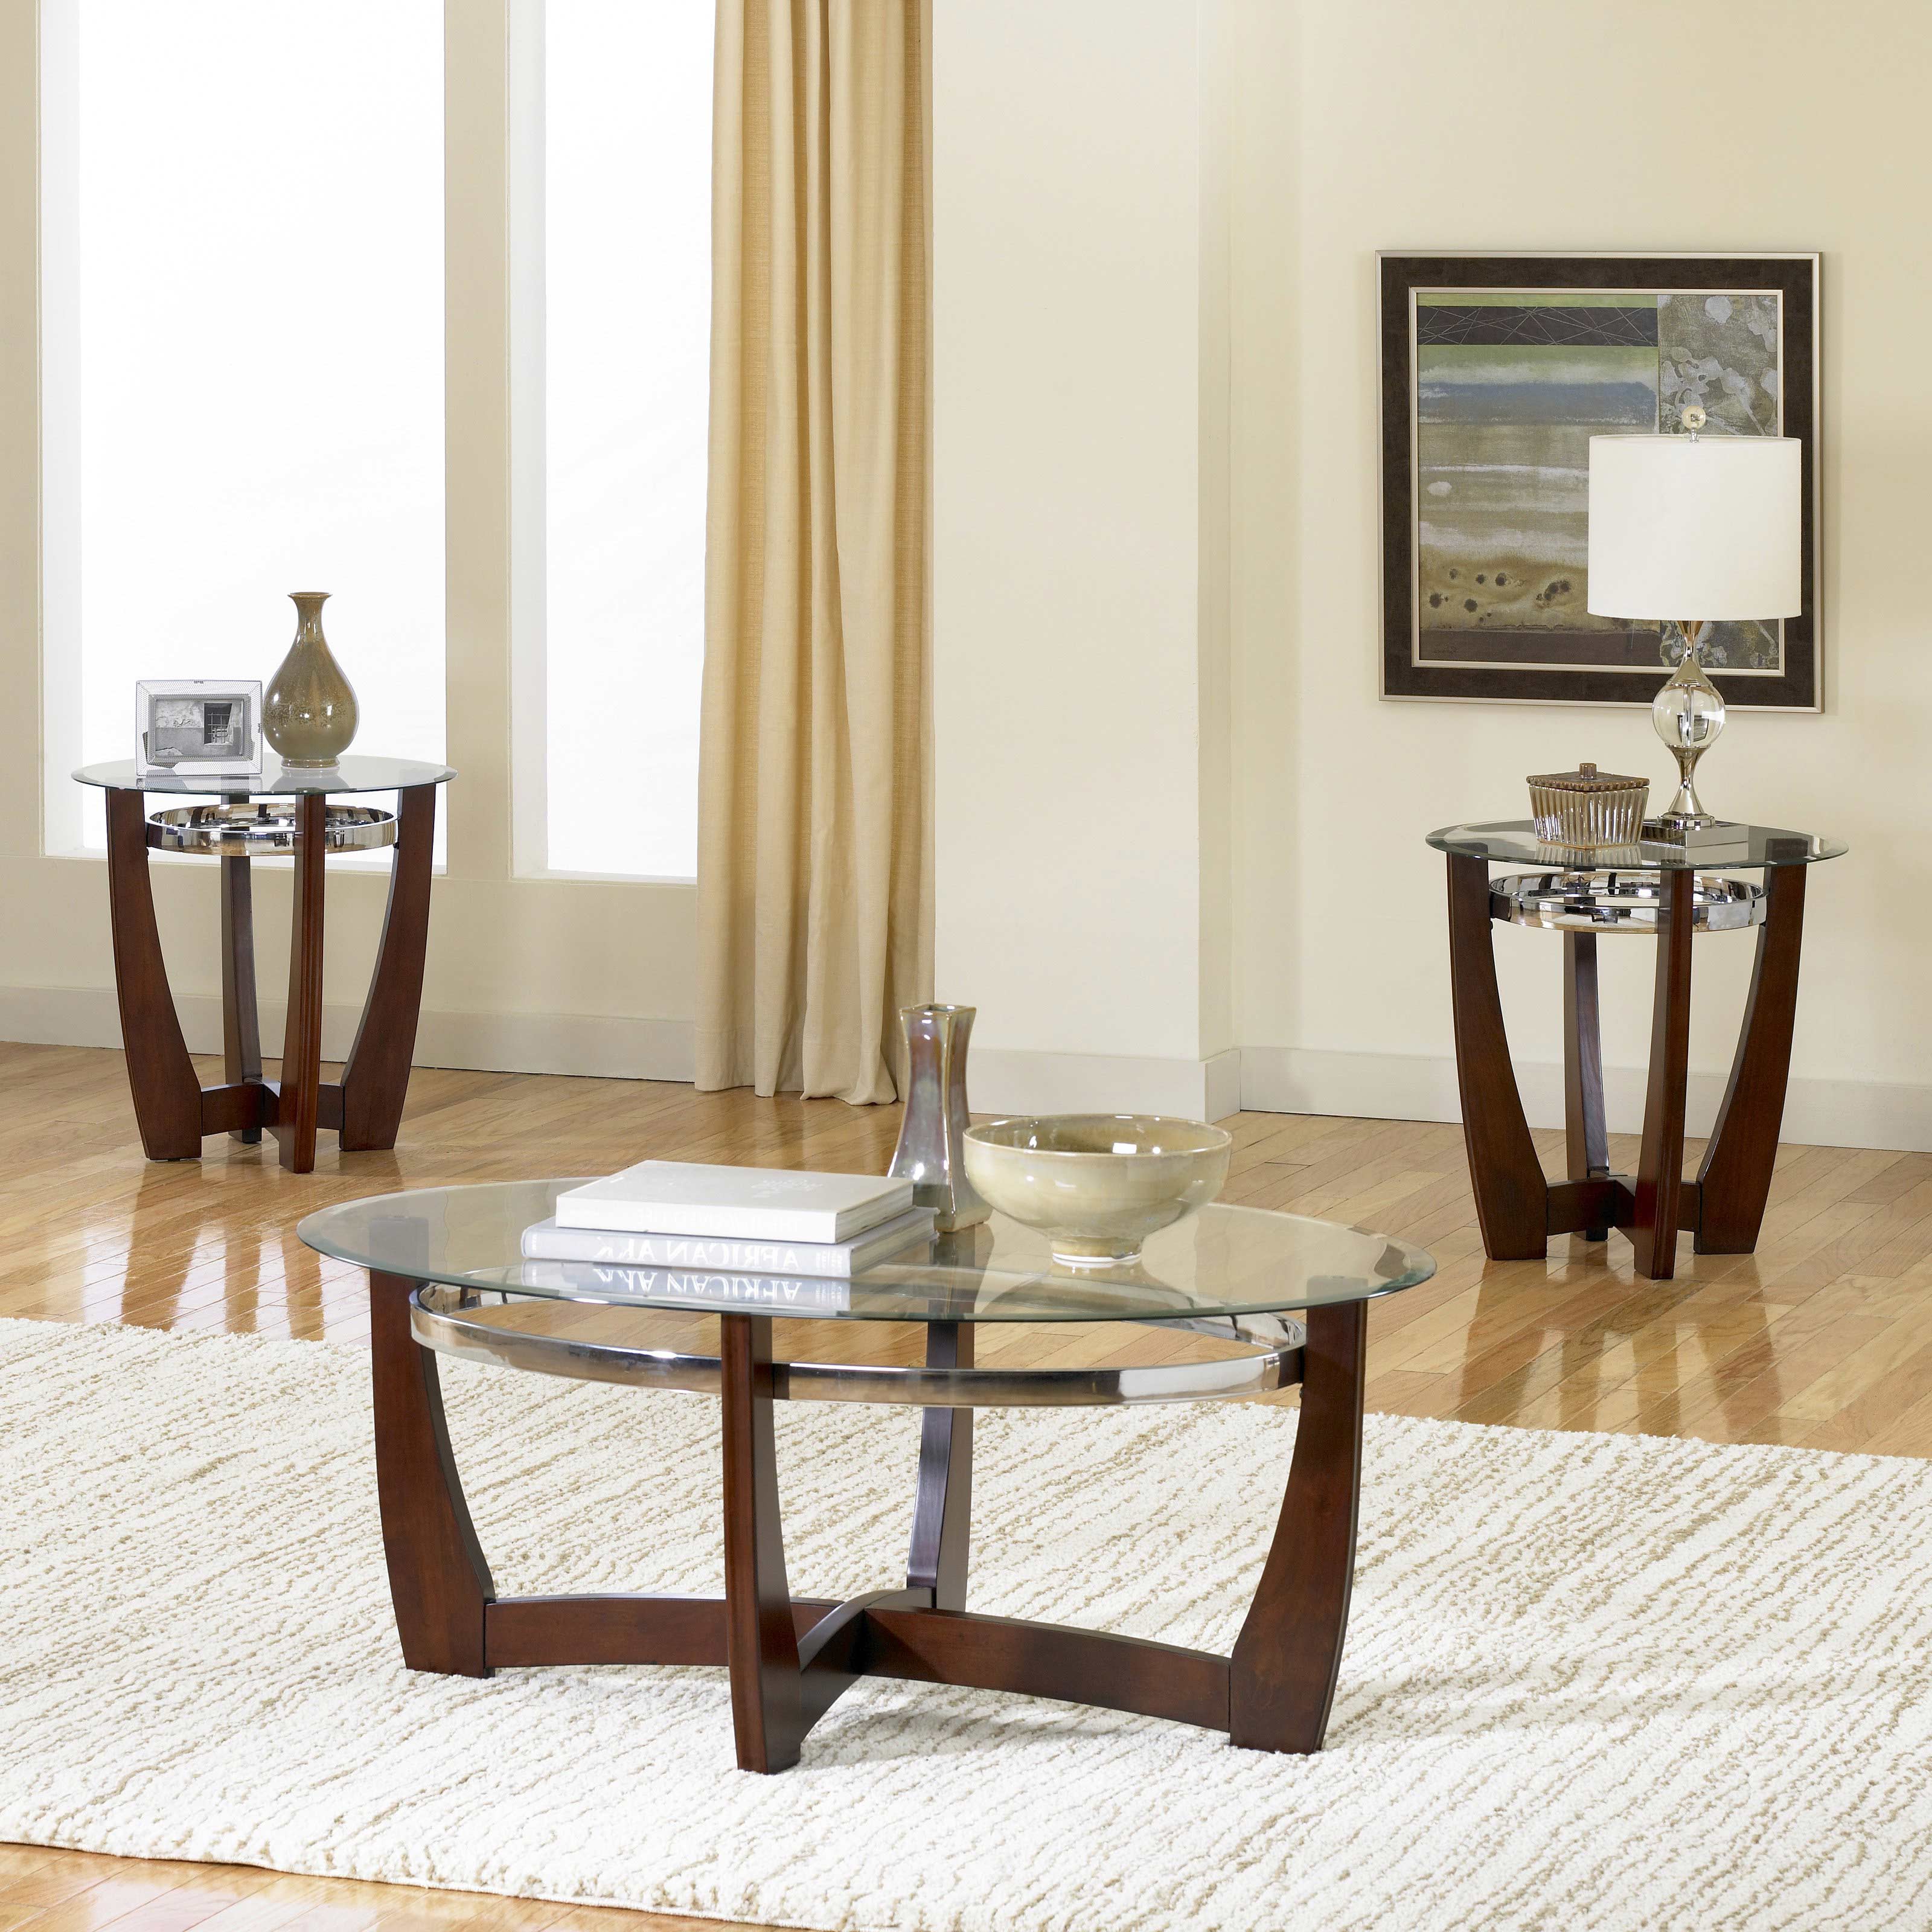 Oval Coffee Table Sets Decorating Ideas Roy Home Design